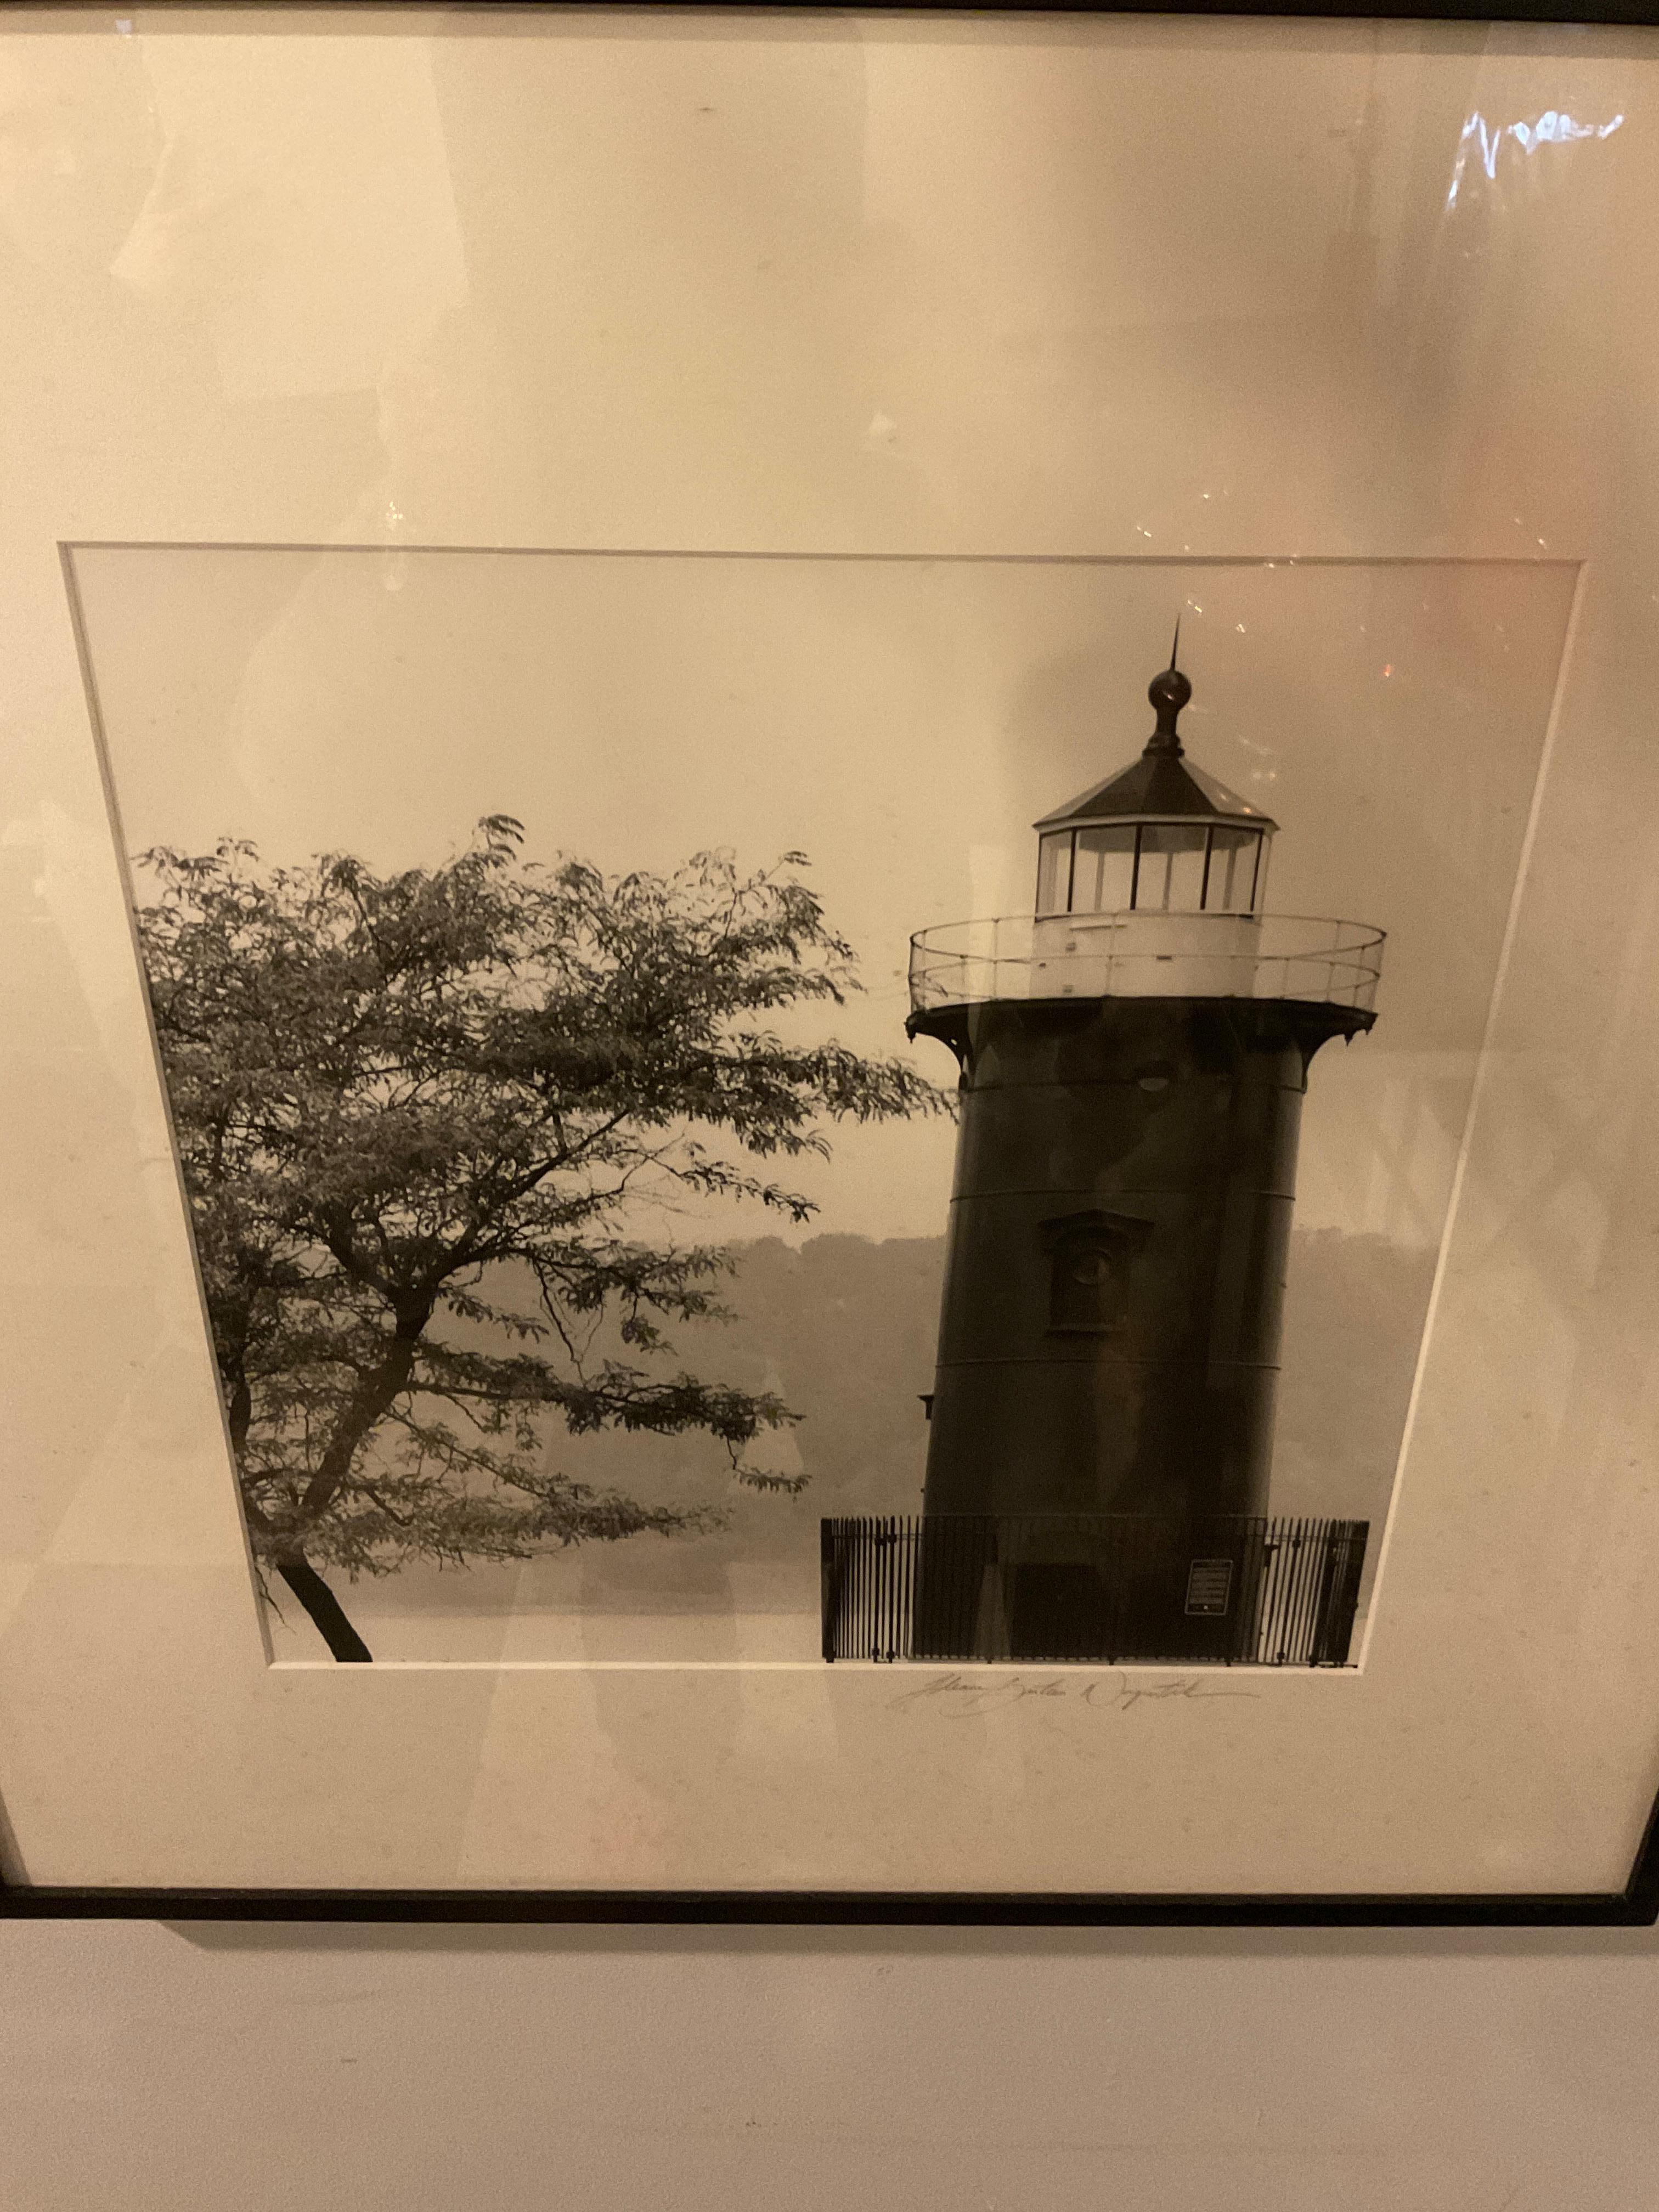 Little Red Lighthouse Photograph By Ileane Bernstein Naprstek In Good Condition For Sale In Tarrytown, NY